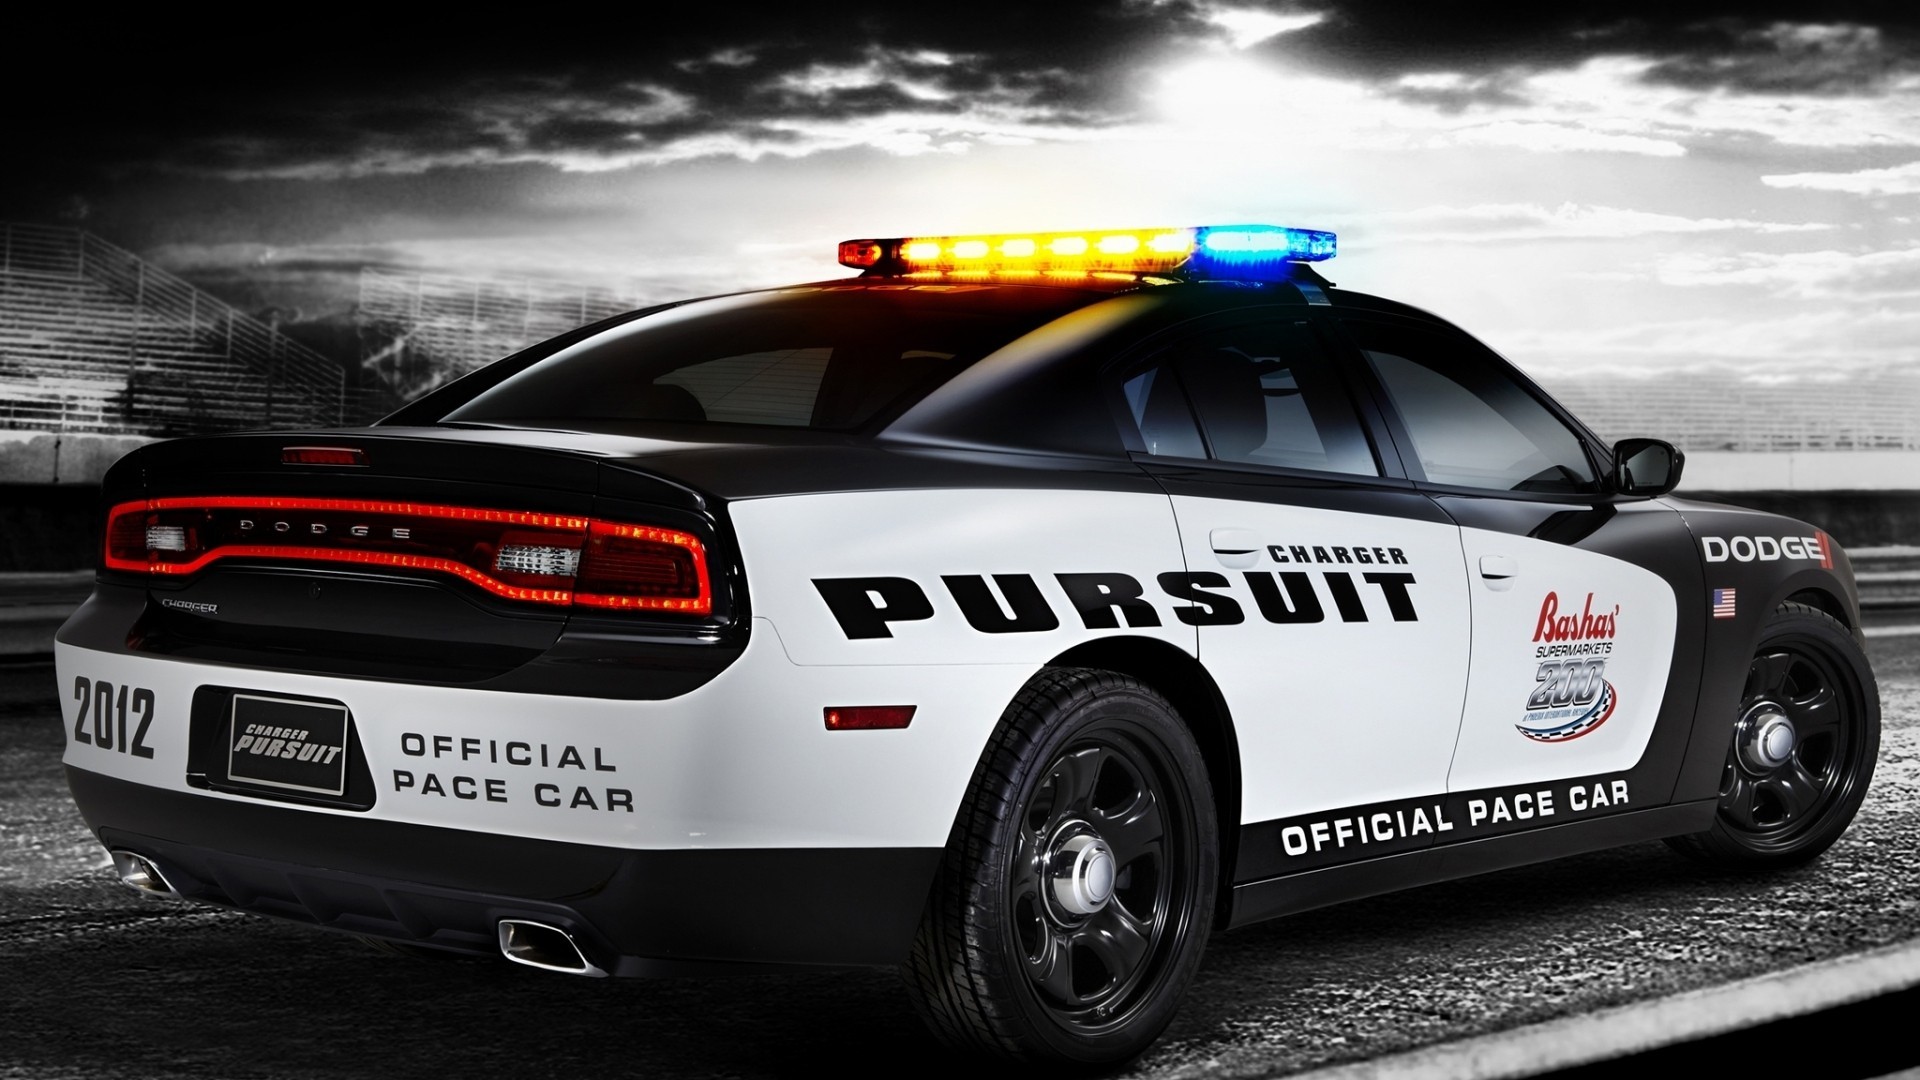 1920x1080 cars, track, Dodge Charger, police cruiser, Pace Car - Free Wallpaper /  WallpaperJam.com